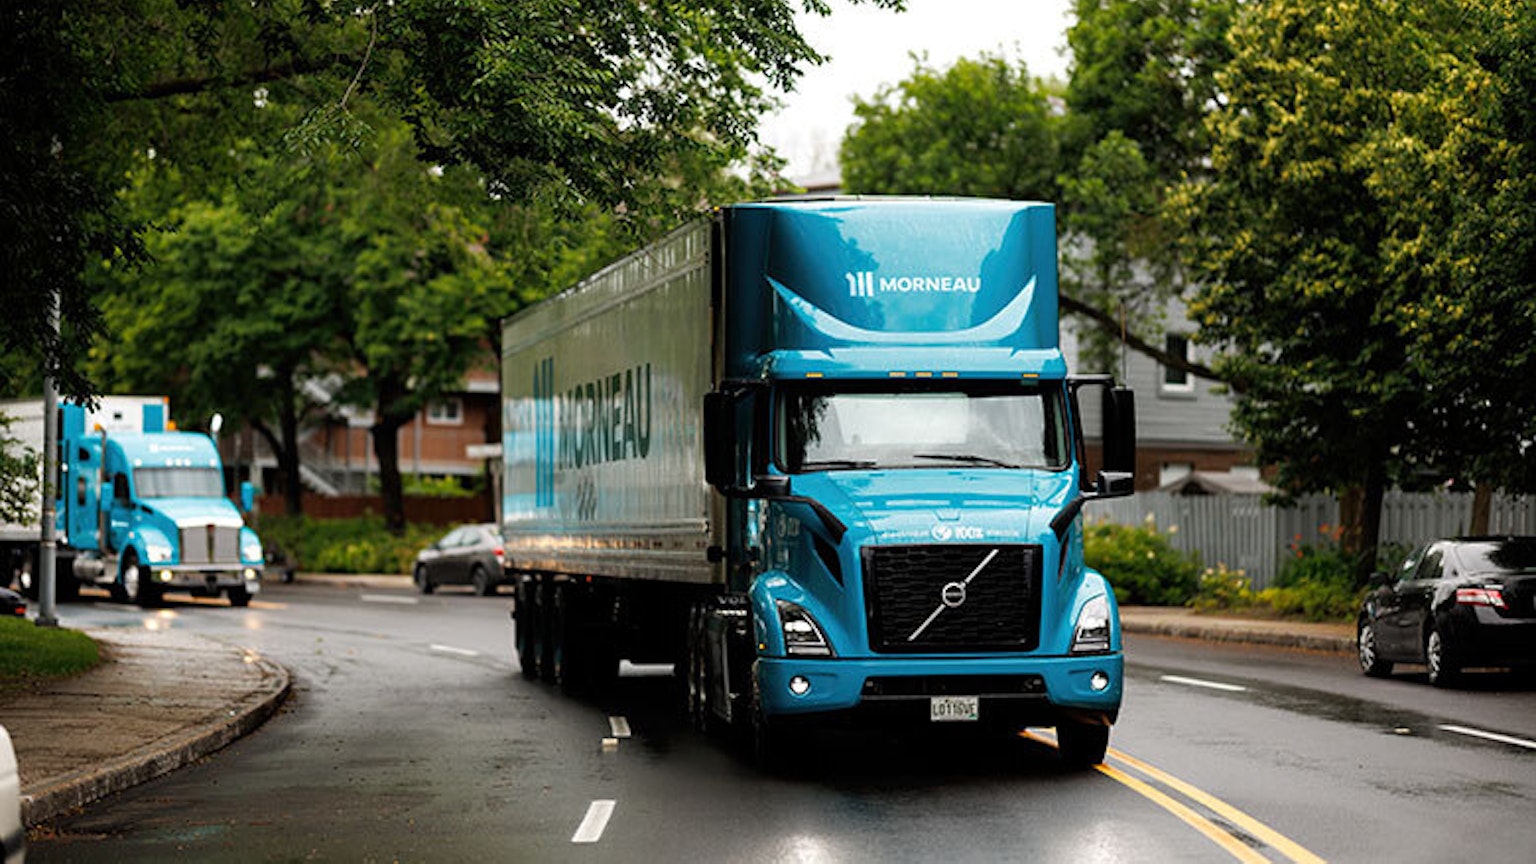 The first 100% electric truck in Canada, owned by Groupe Morneau, followed by a second truck from the company's fleet.